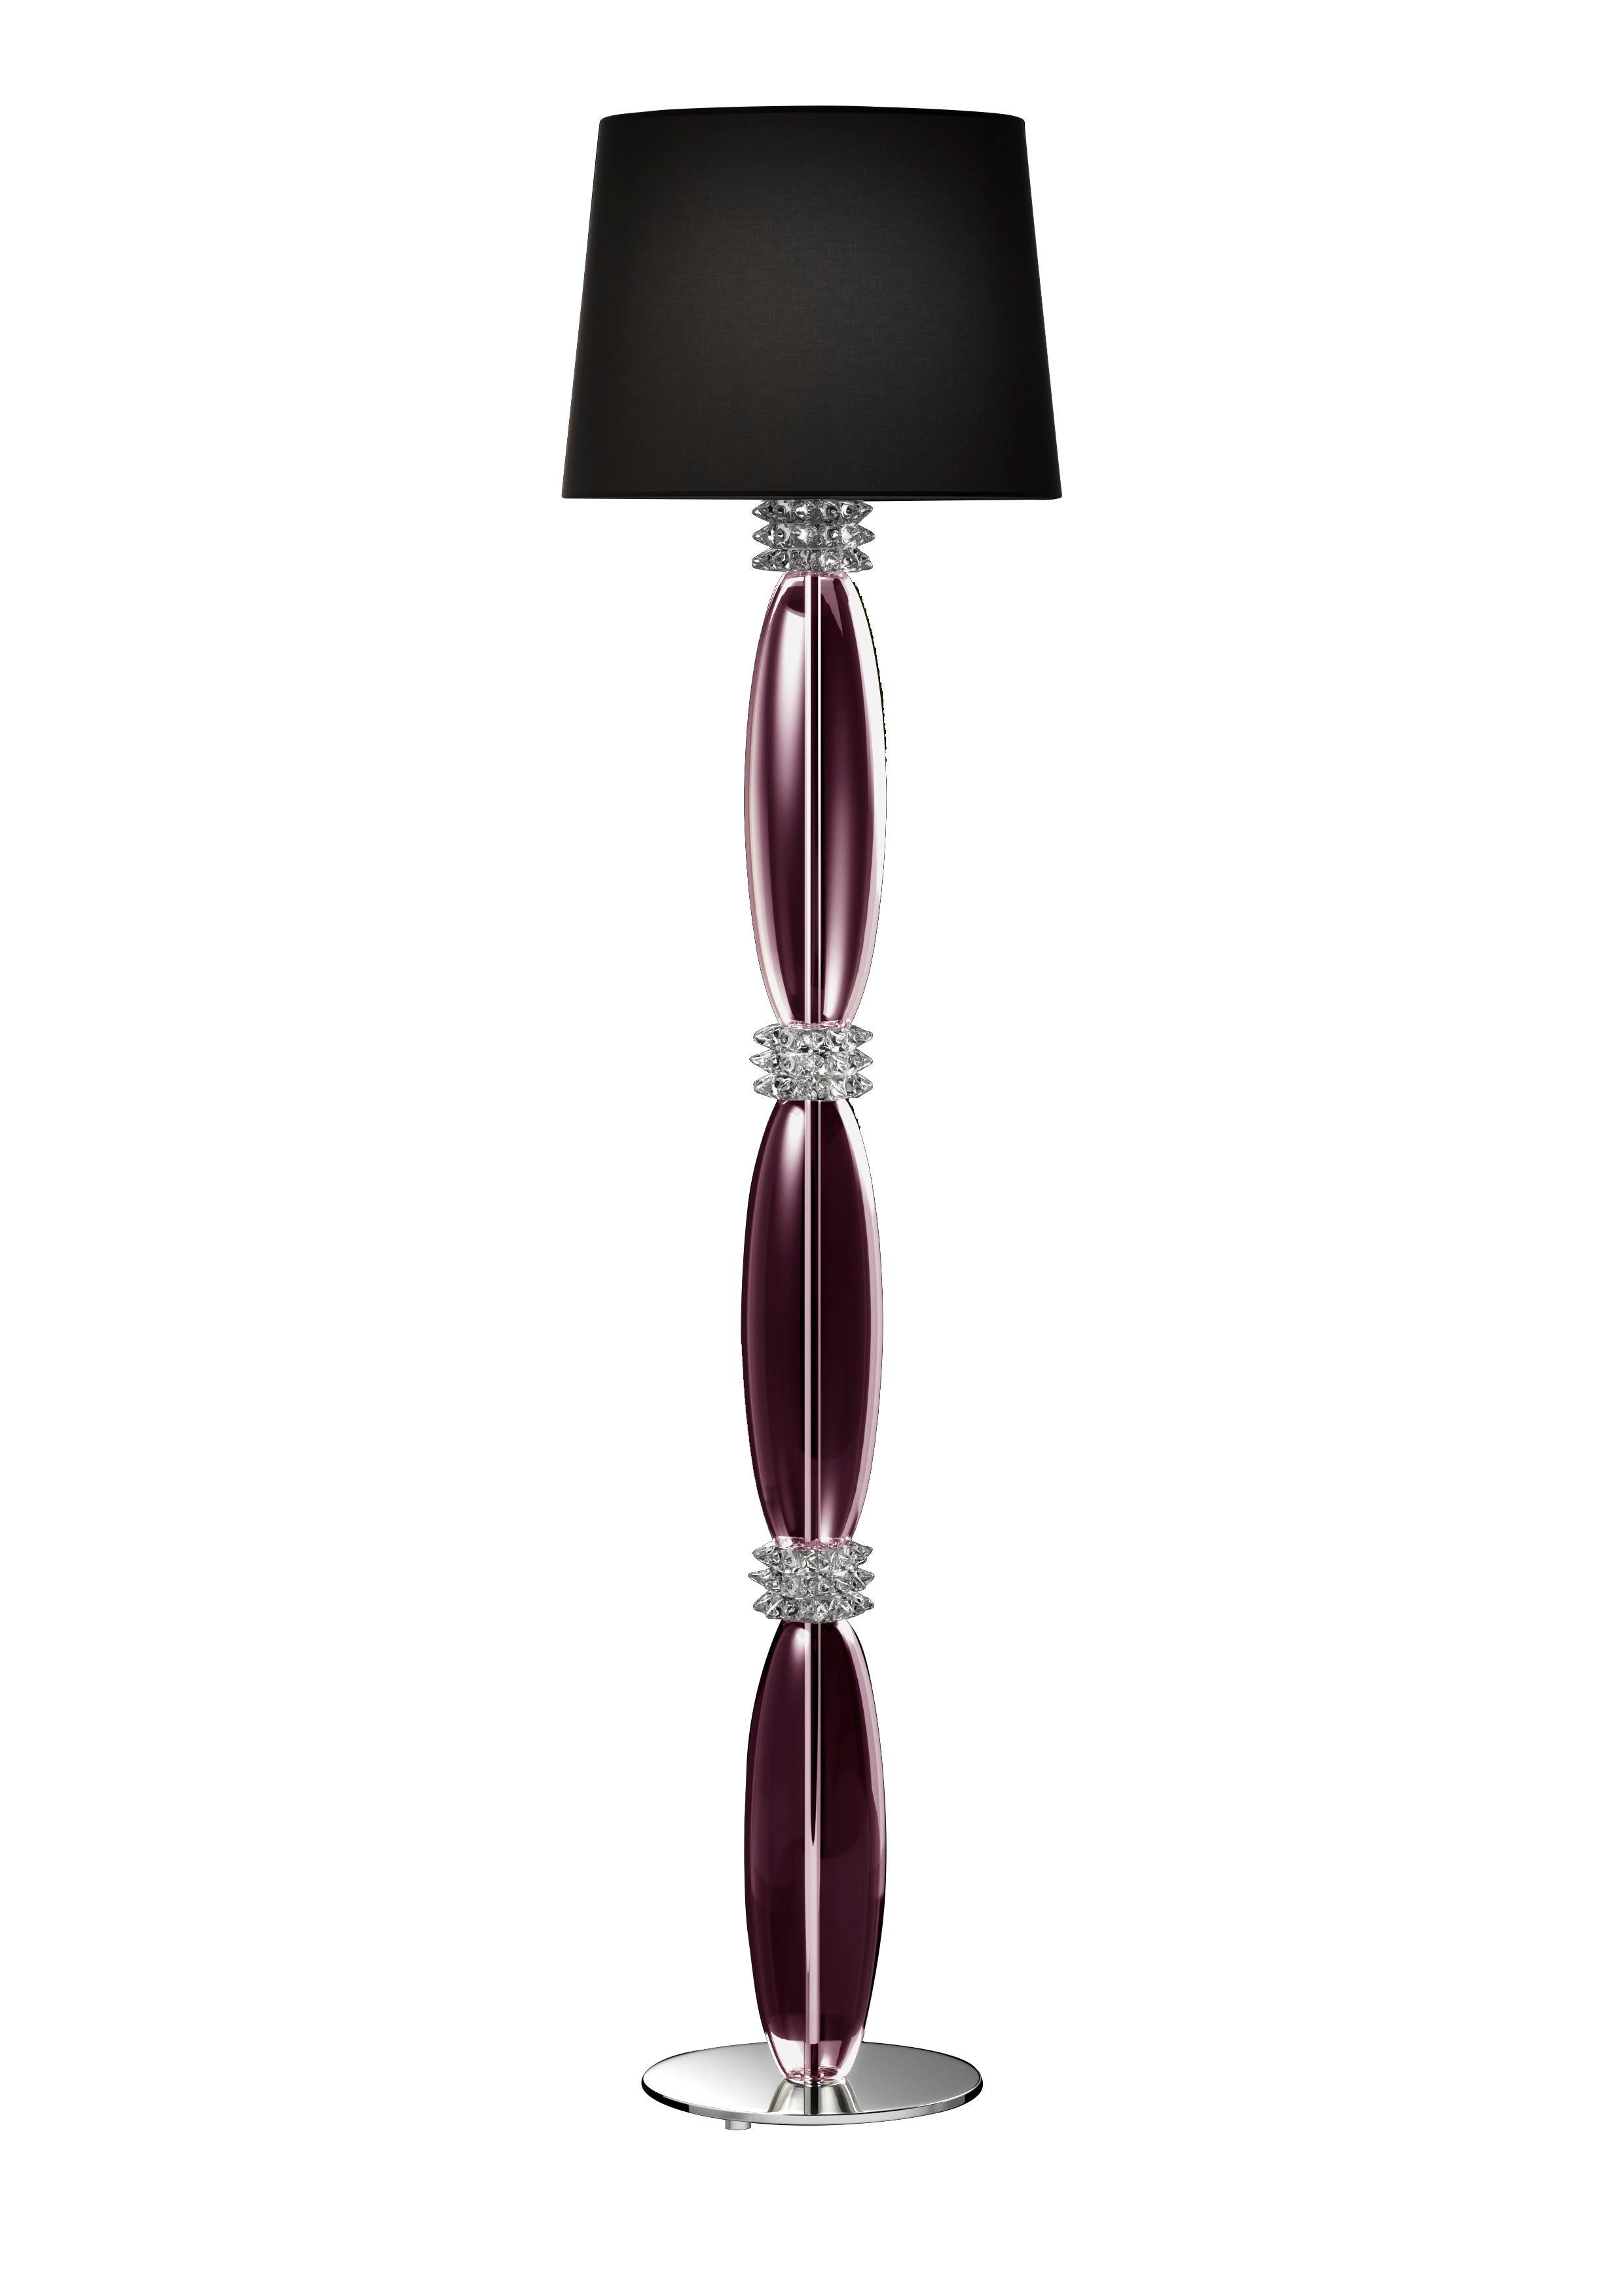 Purple (Violet_VI) Rotterdam 7353 Floor Lamp in Glass with Black Shade, by Barovier&Toso